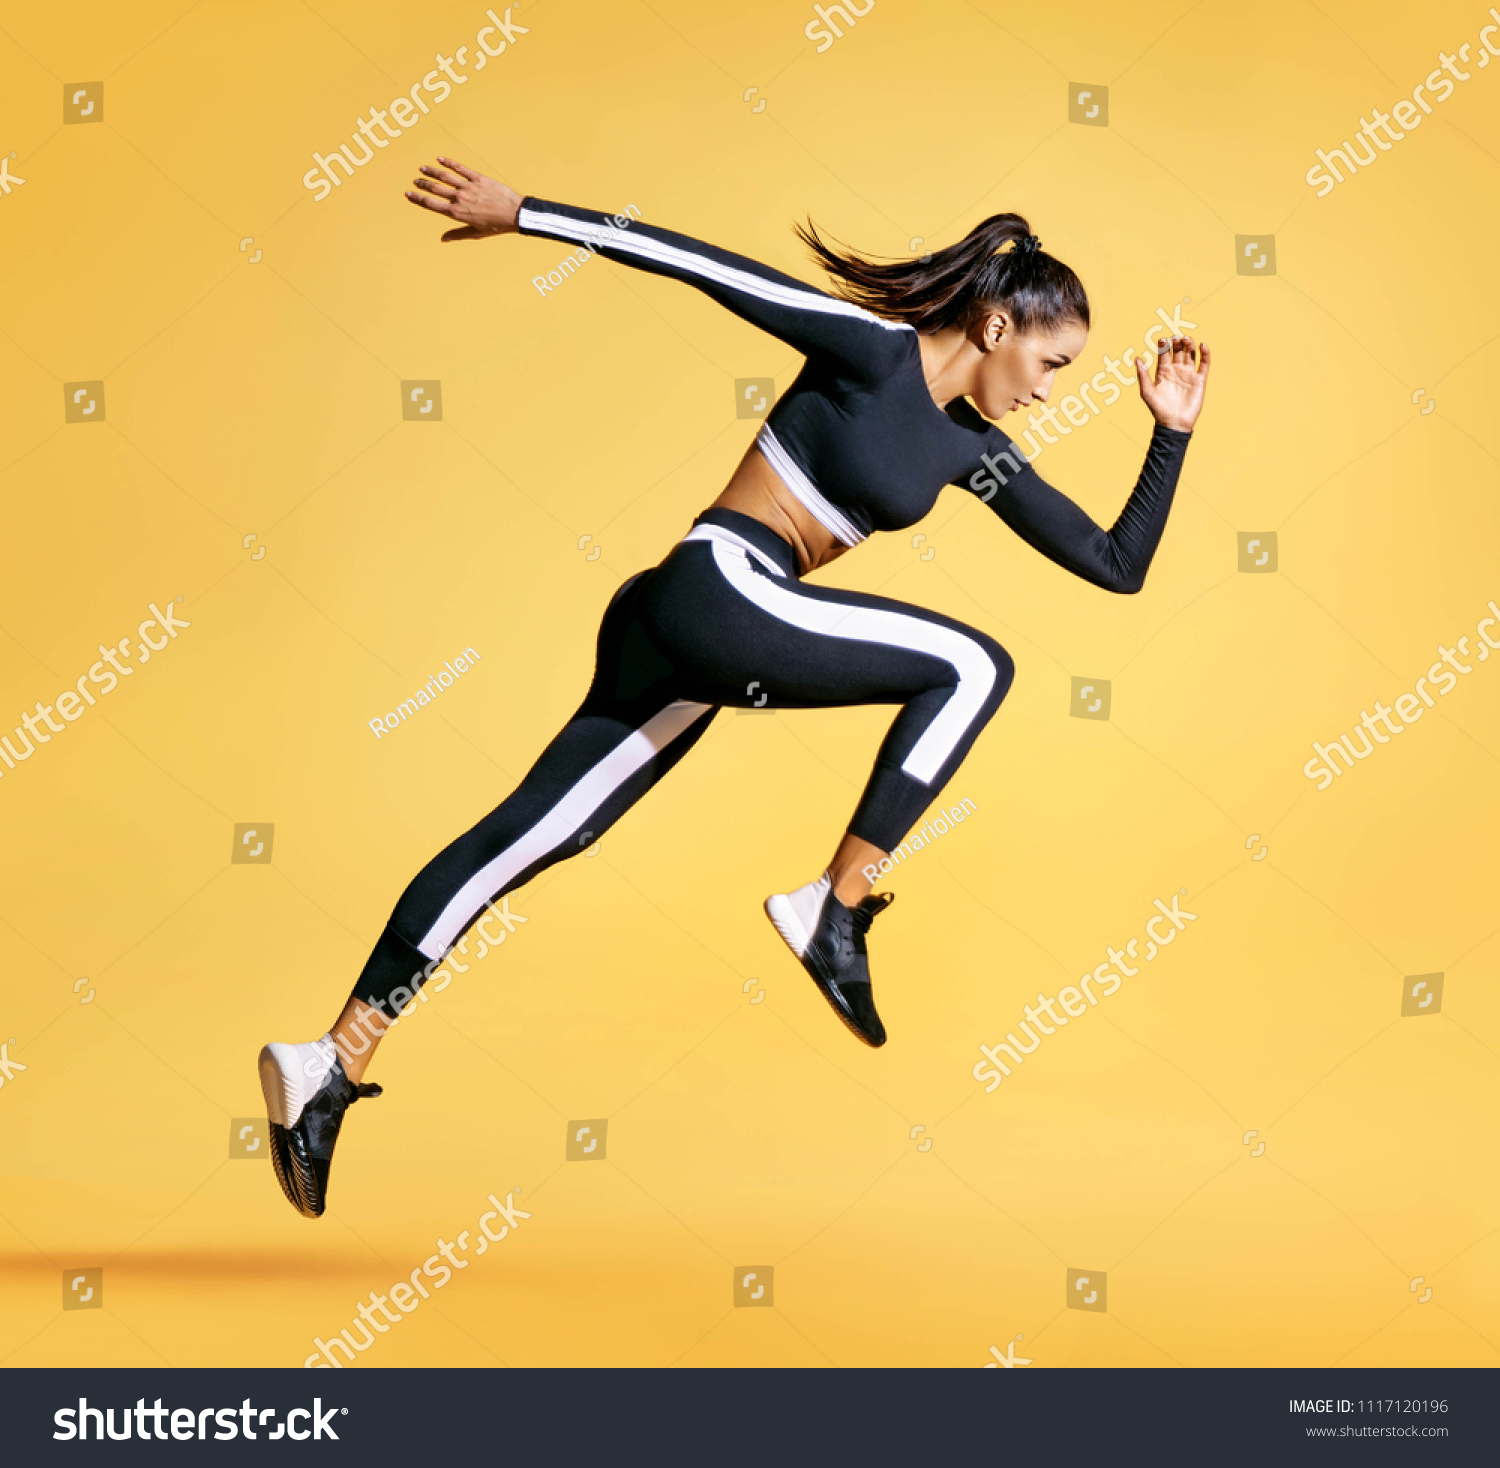 Sporty woman runner in silhouette on yellow background. Photo of attractive woman in fashionable sportswear. Dynamic movement. Side view. Sport and healthy lifestyle #1117120196